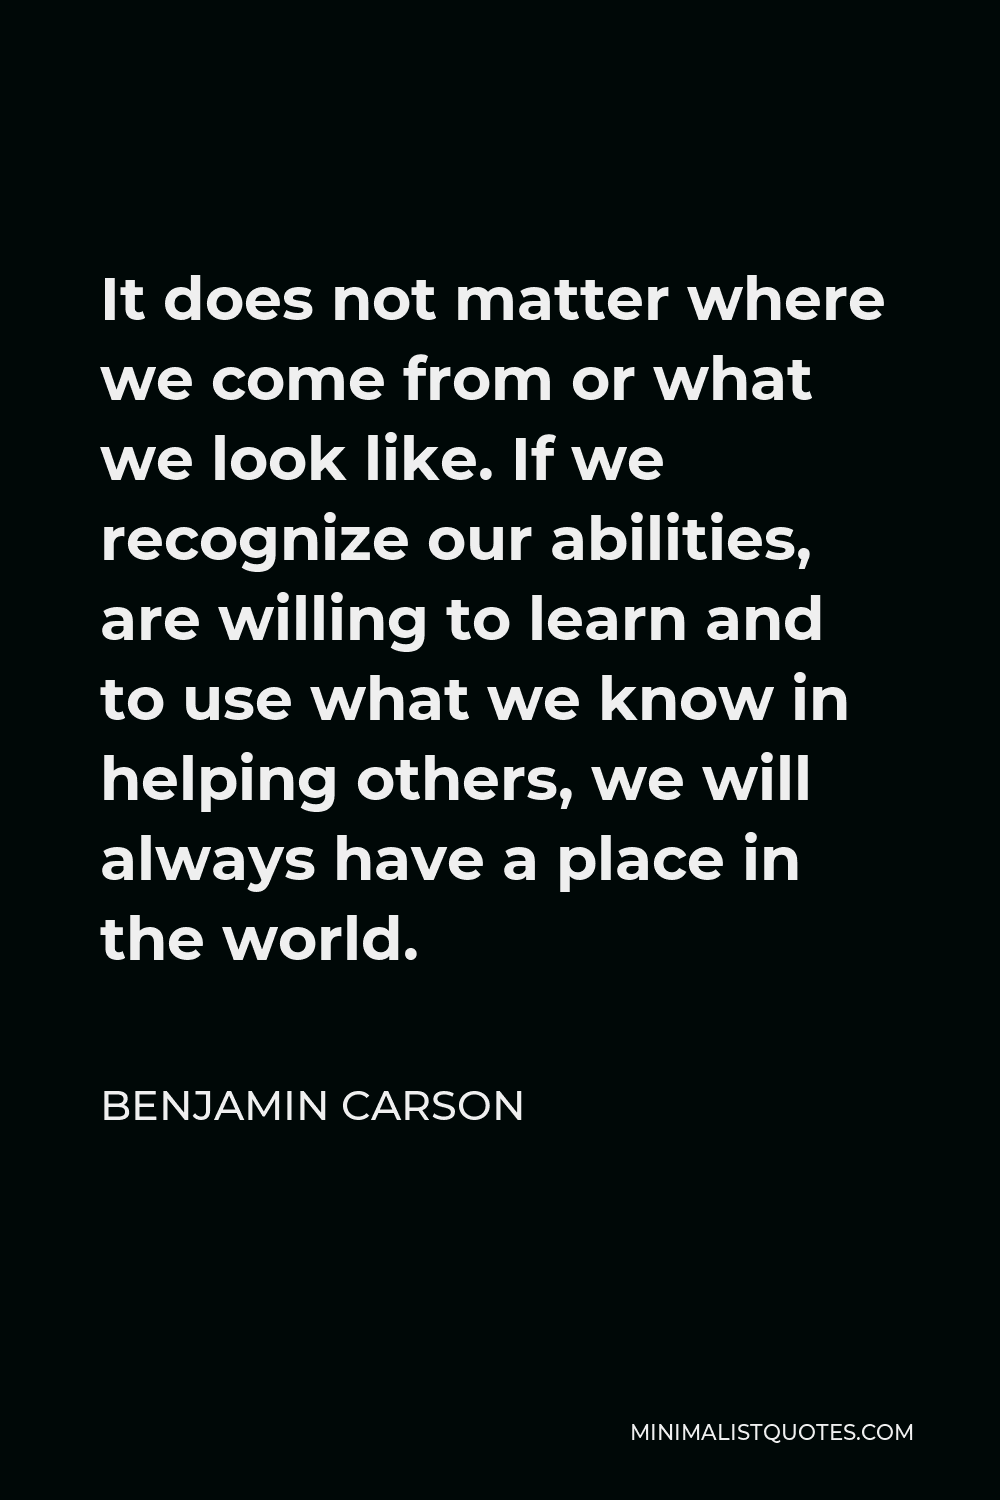 Benjamin Carson Quote - It does not matter where we come from or what we look like. If we recognize our abilities, are willing to learn and to use what we know in helping others, we will always have a place in the world.